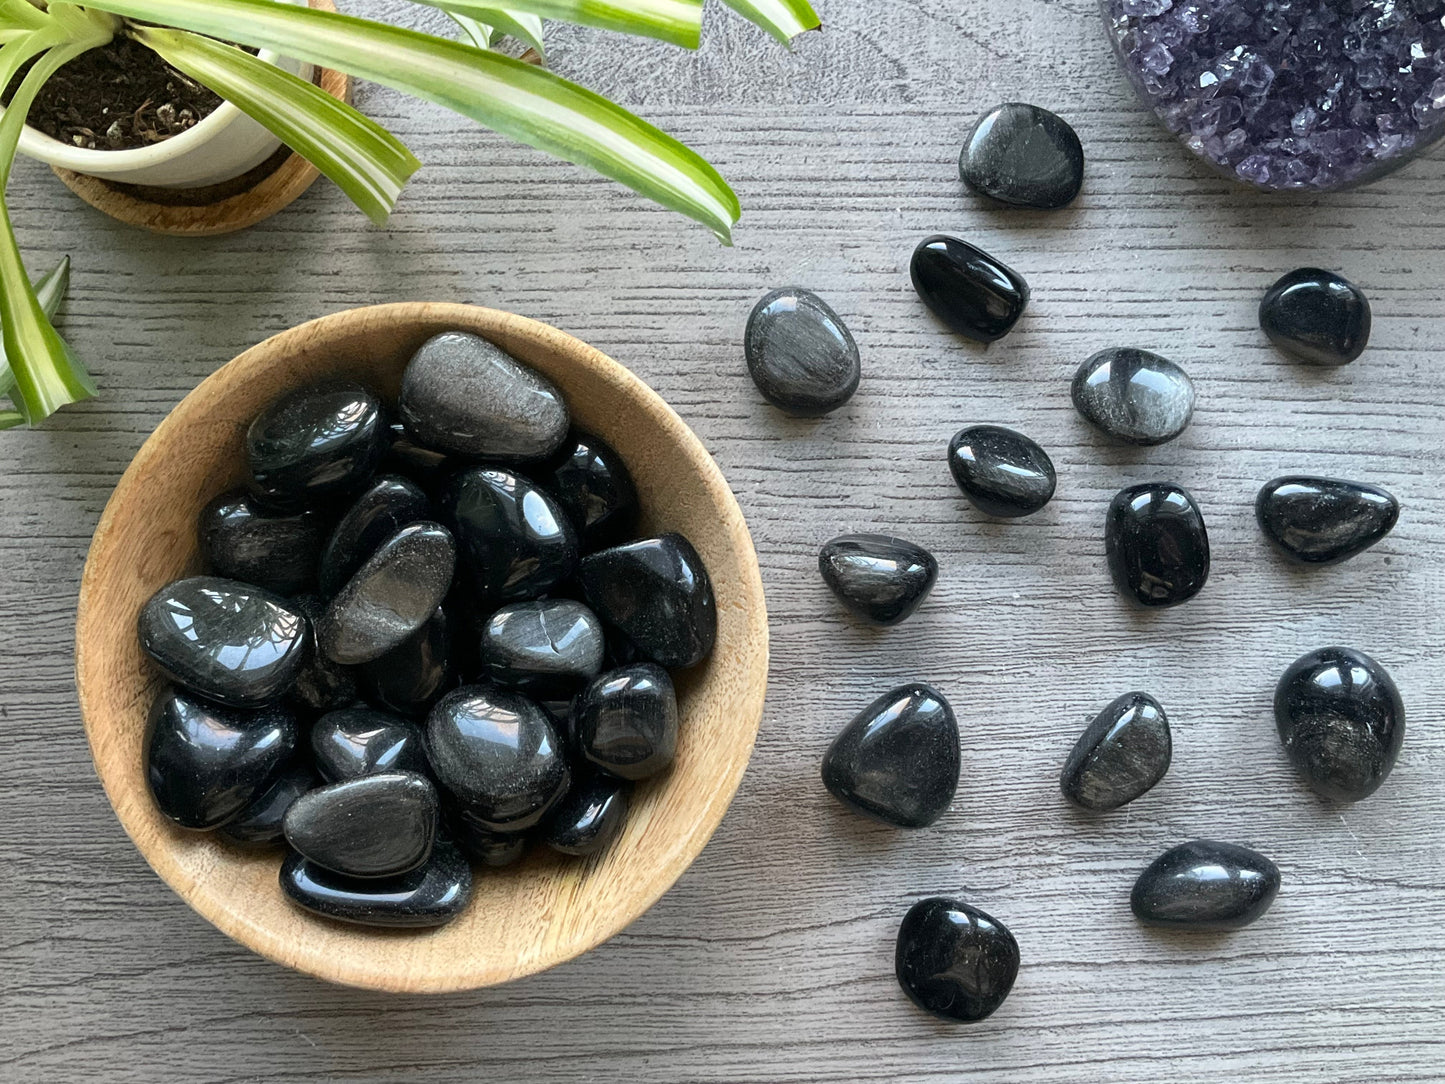 Pictured are various silver sheen obsidian tumbled stones.